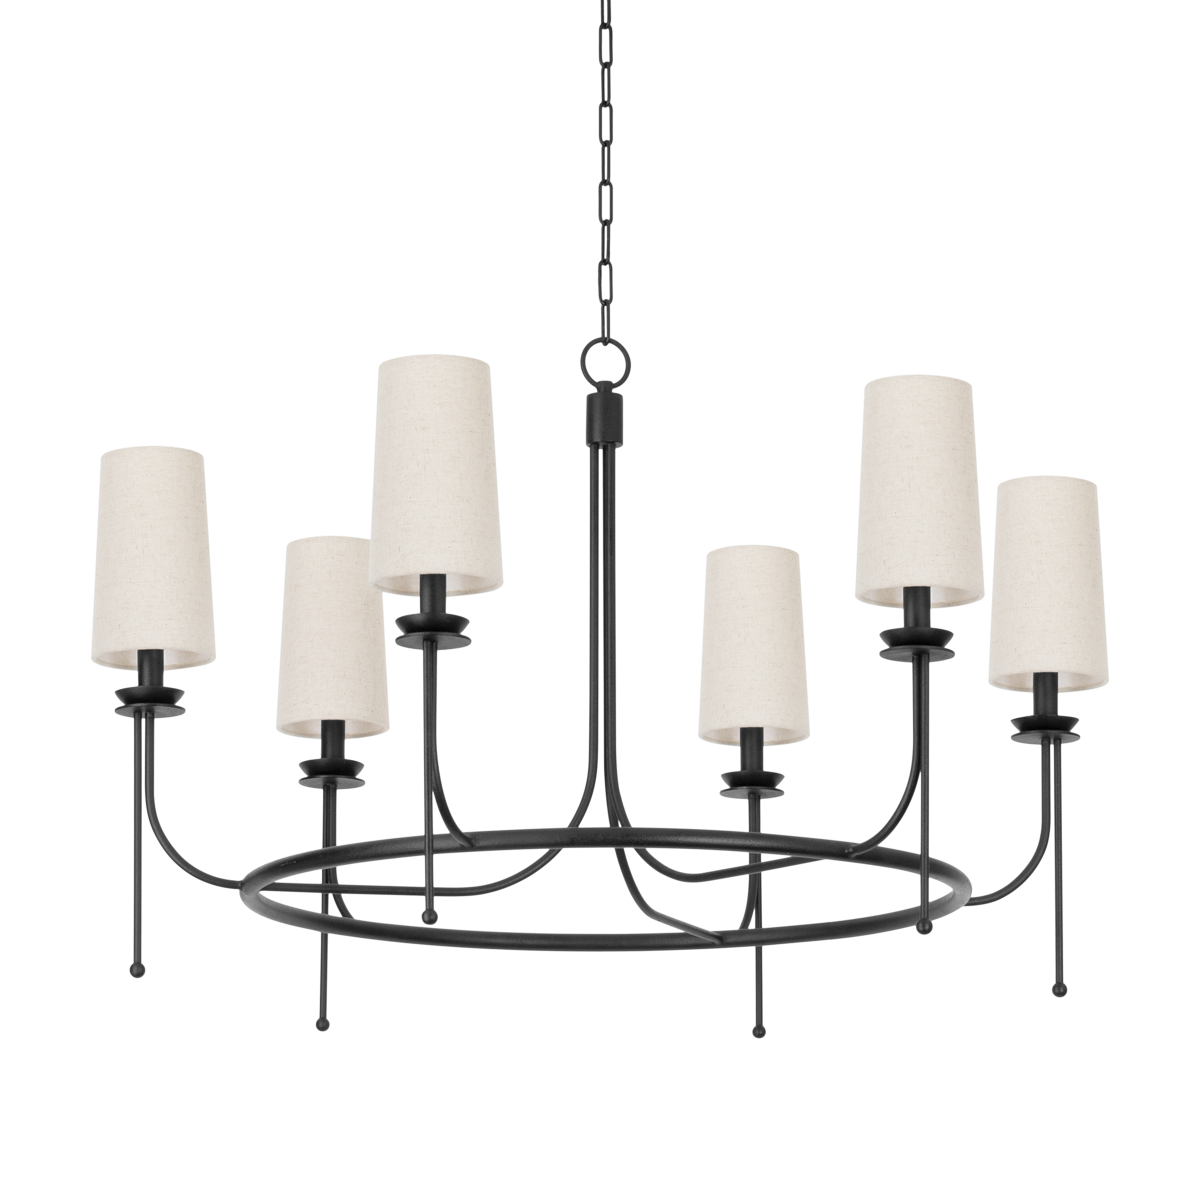 Troy Lighting - F1240-FOR - Six Light Chandelier - Calder - Forged Iron